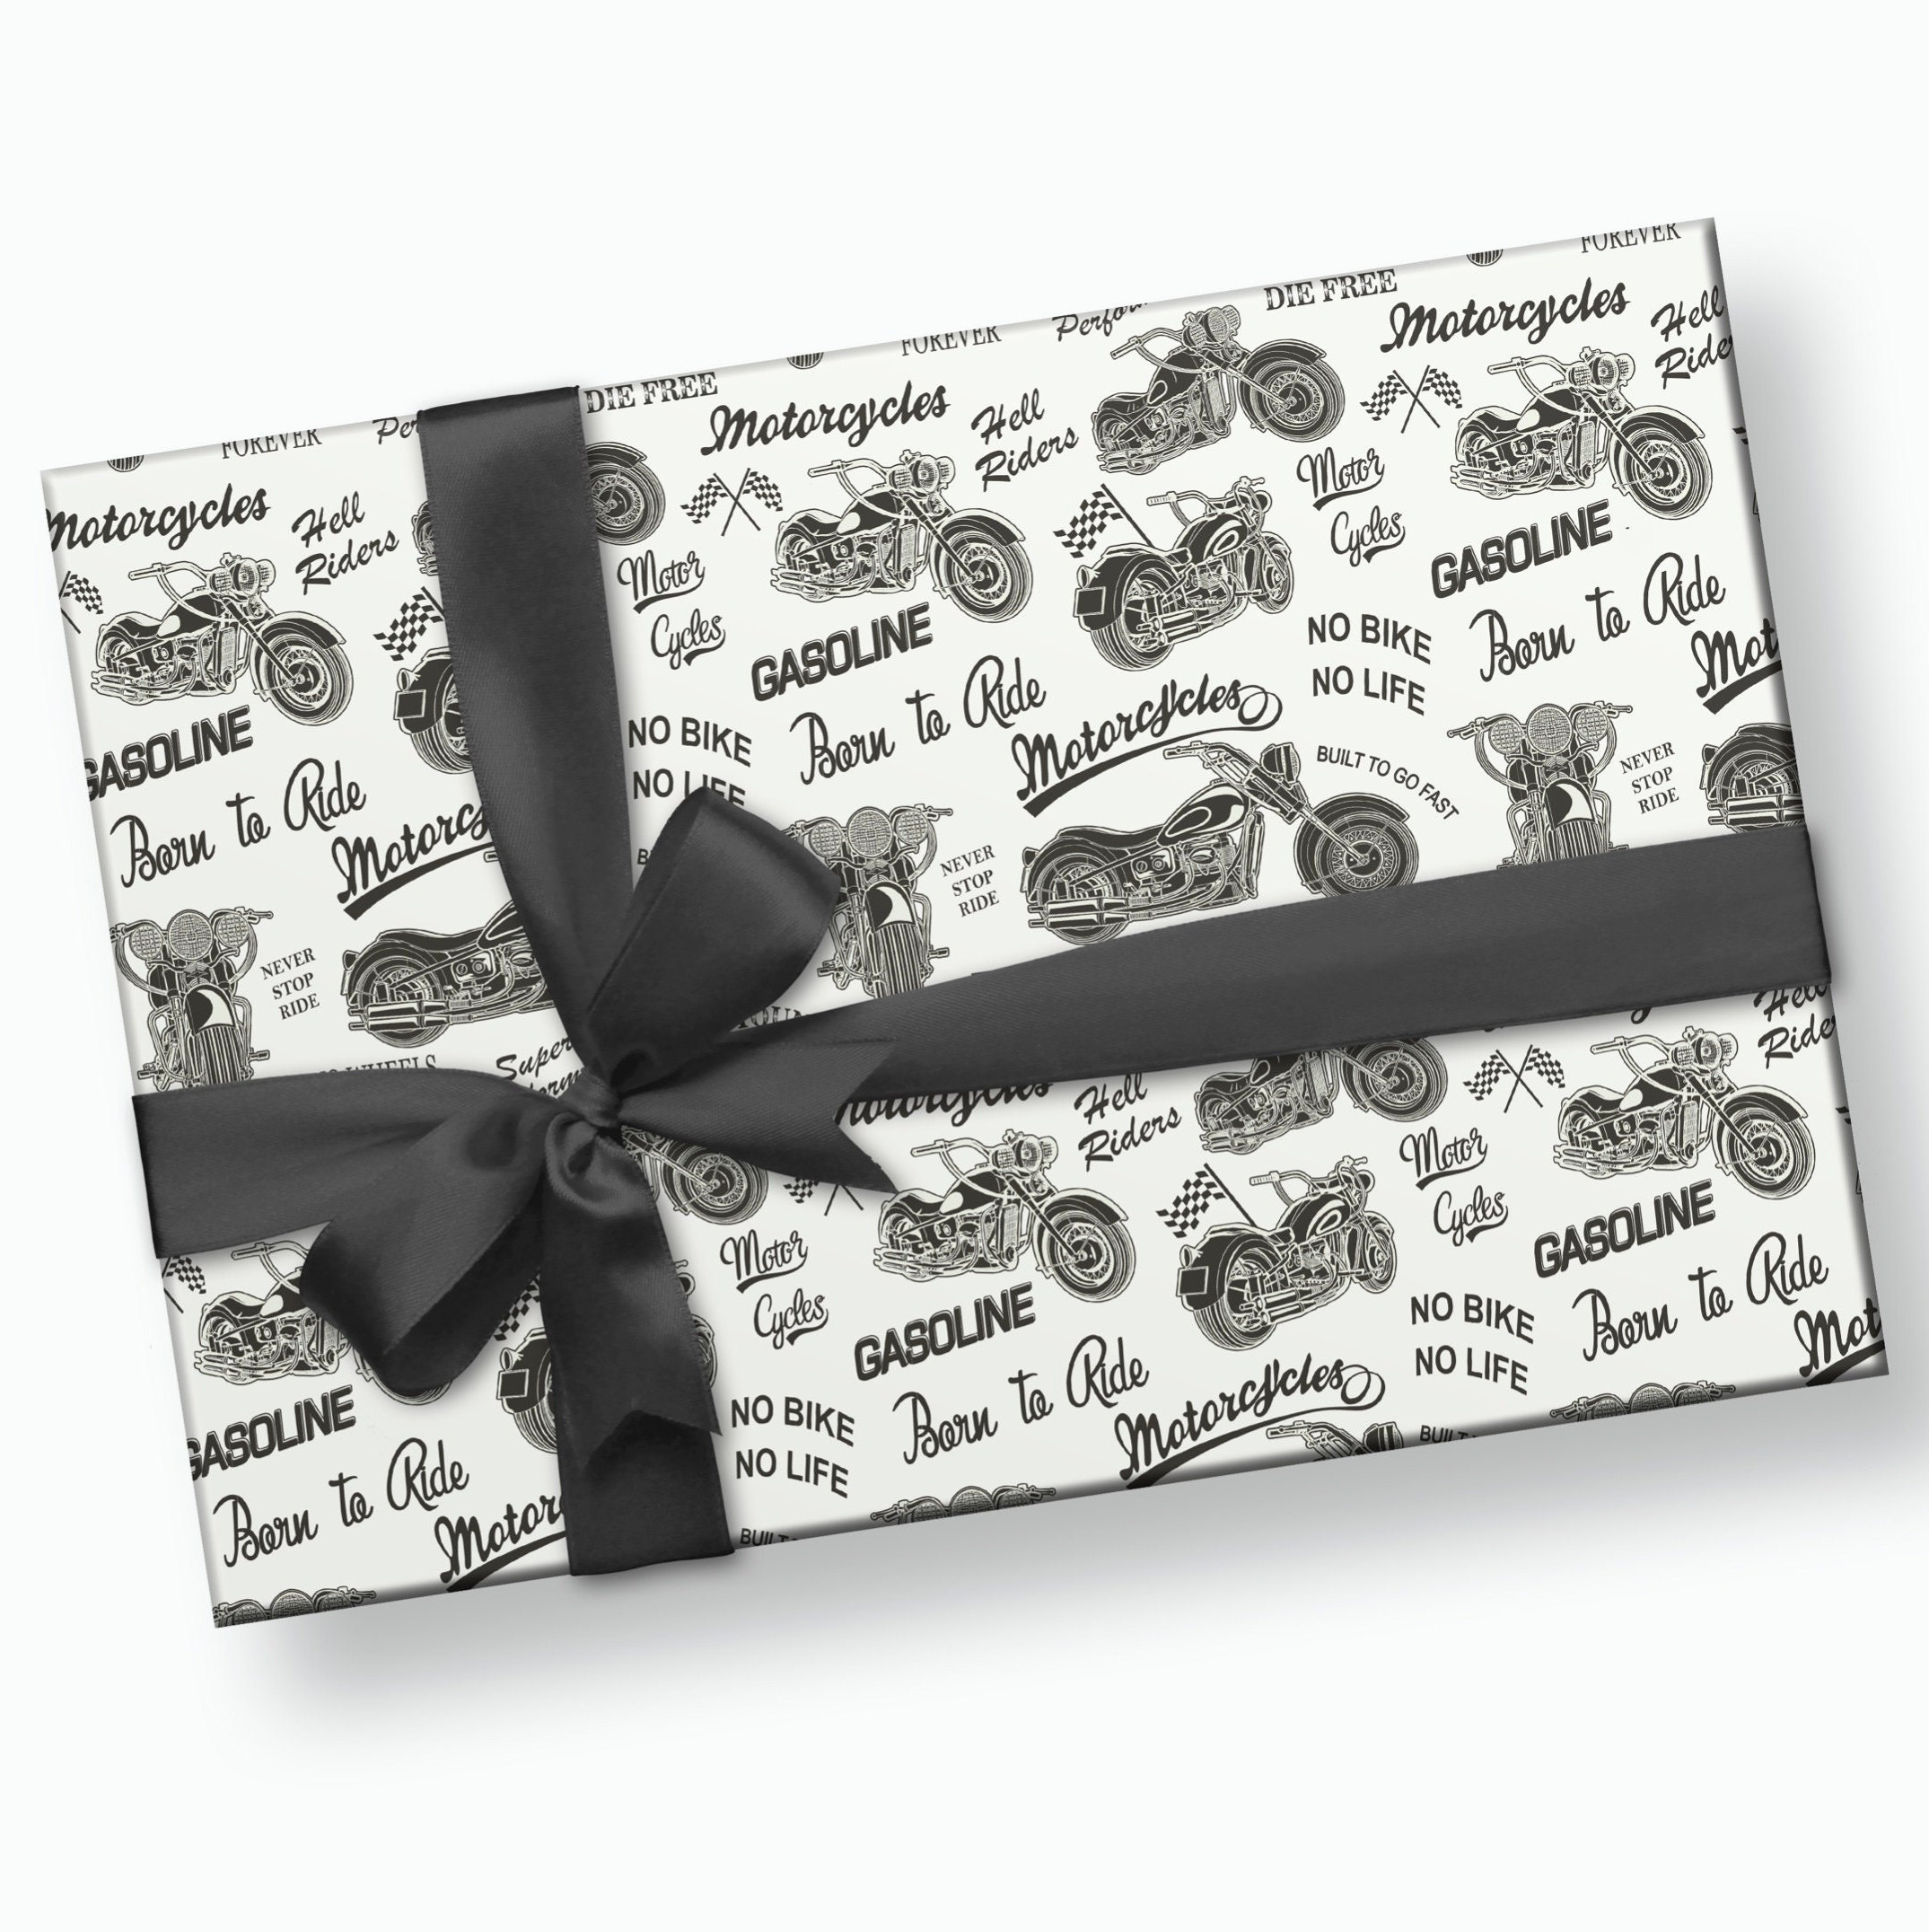 Whiskey and Bourbon Wrapping Paper Roll, Alcohol Gift Wrap